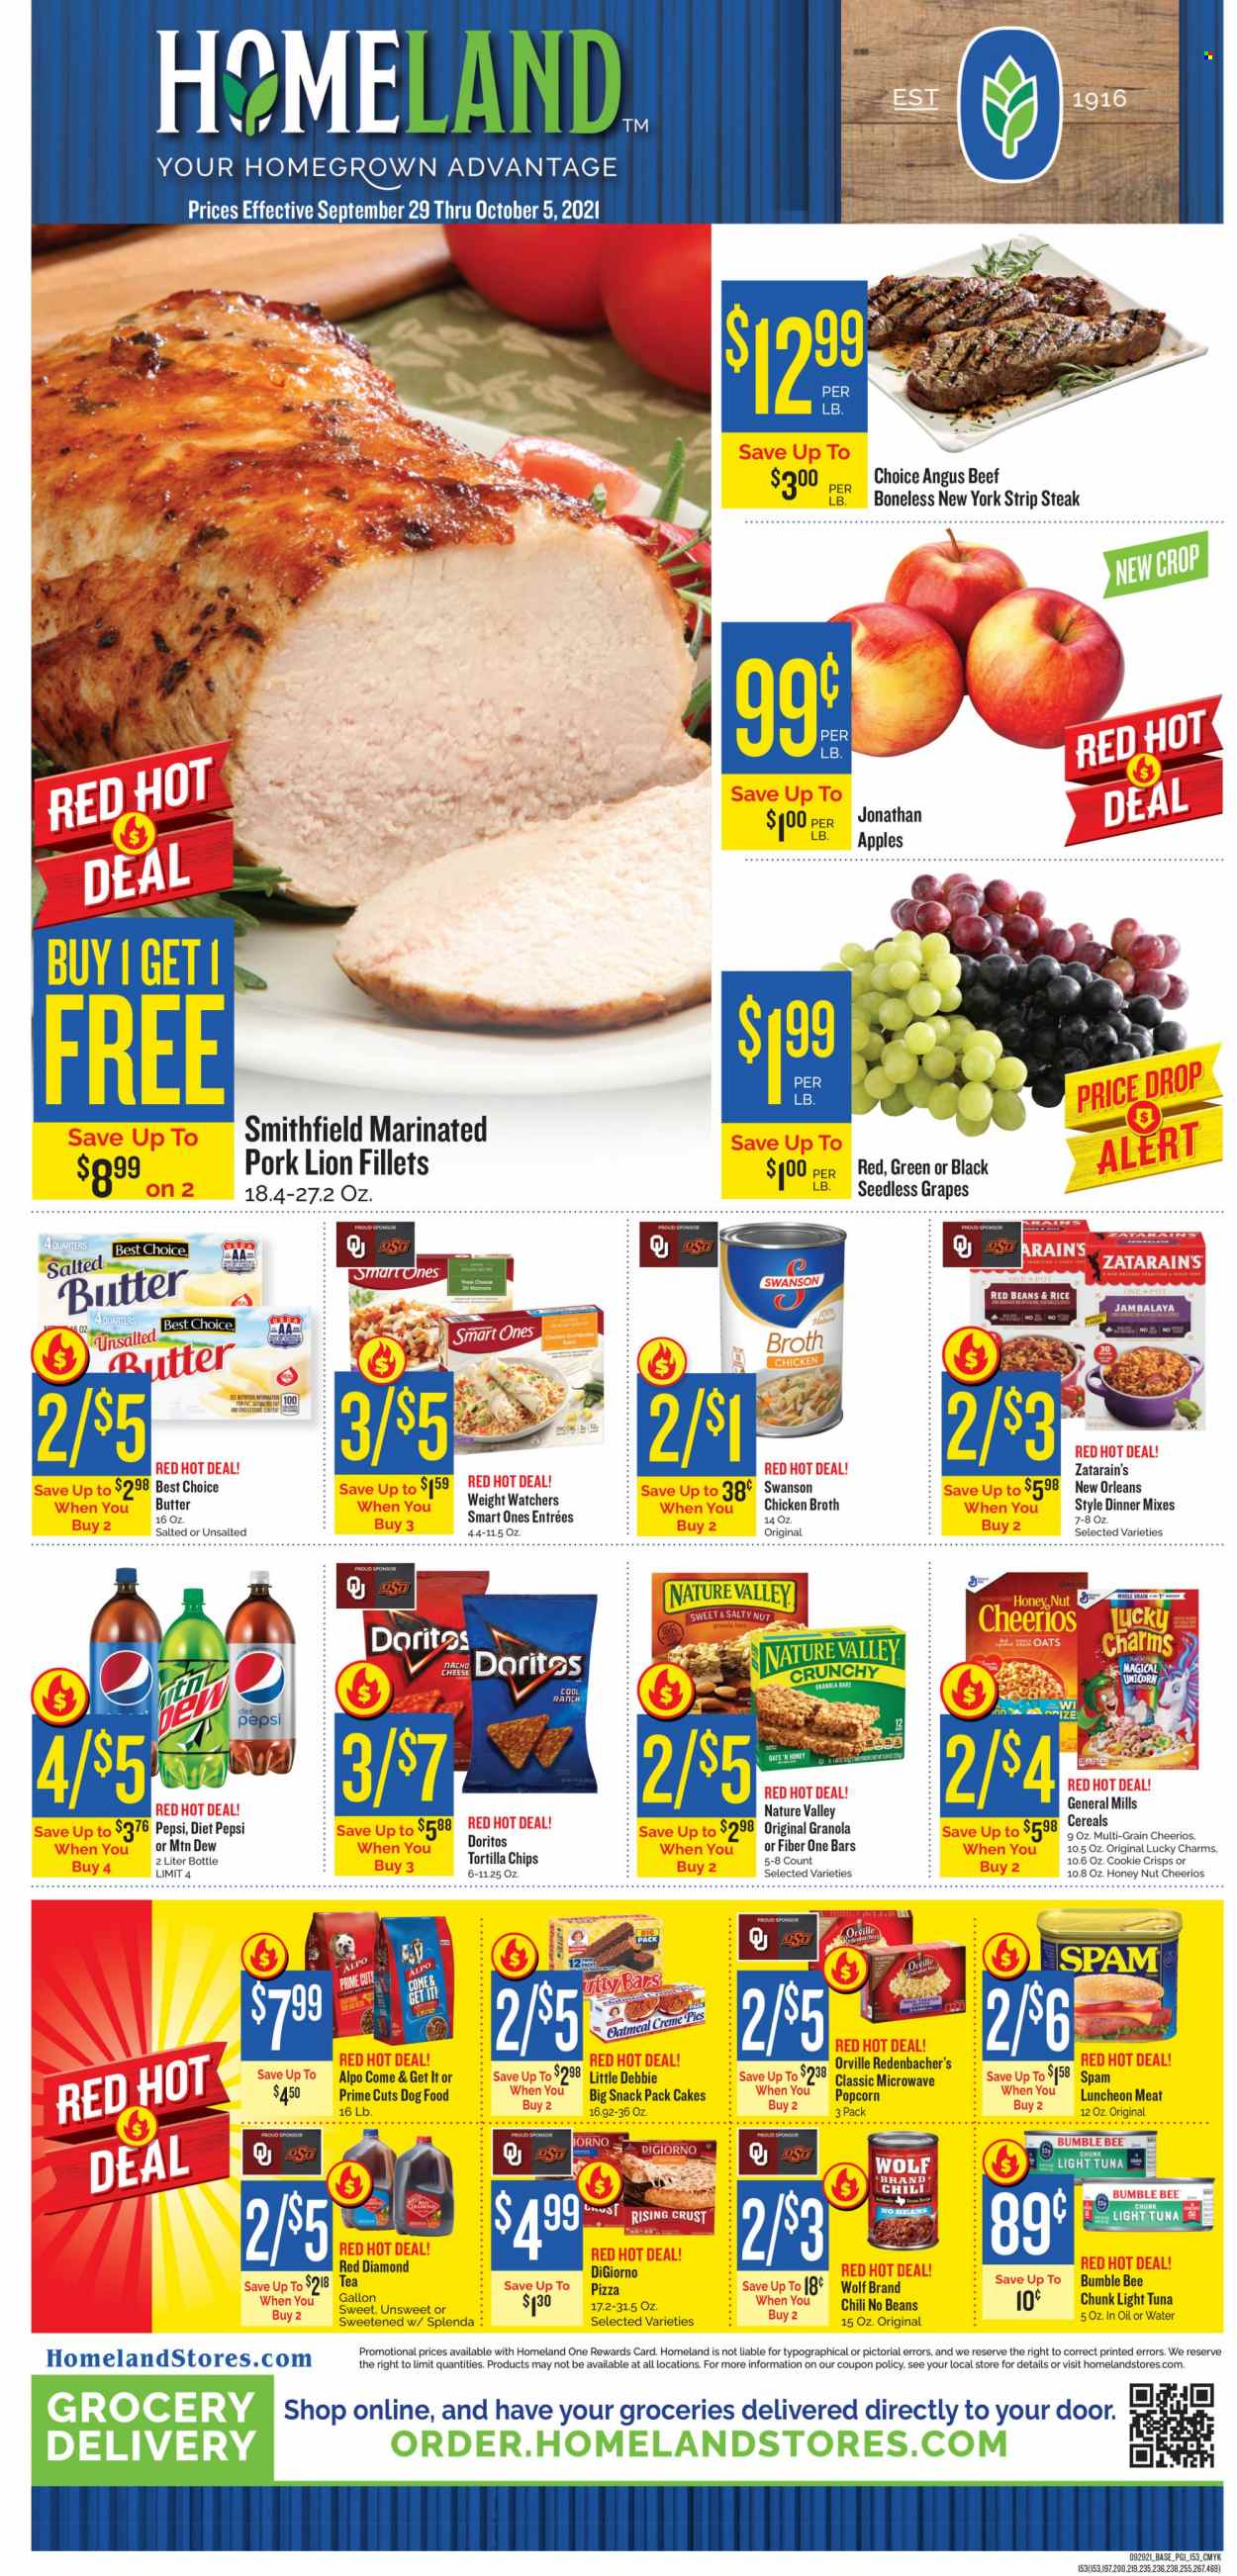 thumbnail - Homeland Flyer - 09/29/2021 - 10/05/2021 - Sales products - seedless grapes, cake, beans, apples, grapes, pizza, Bumble Bee, Spam, lunch meat, butter, Doritos, tortilla chips, chips, popcorn, chicken broth, oatmeal, broth, red beans, light tuna, cereals, granola, Cheerios, Nature Valley, Fiber One, rice, Mountain Dew, Pepsi, Diet Pepsi, tea, beef meat, steak, striploin steak, pork meat, marinated pork. Page 1.